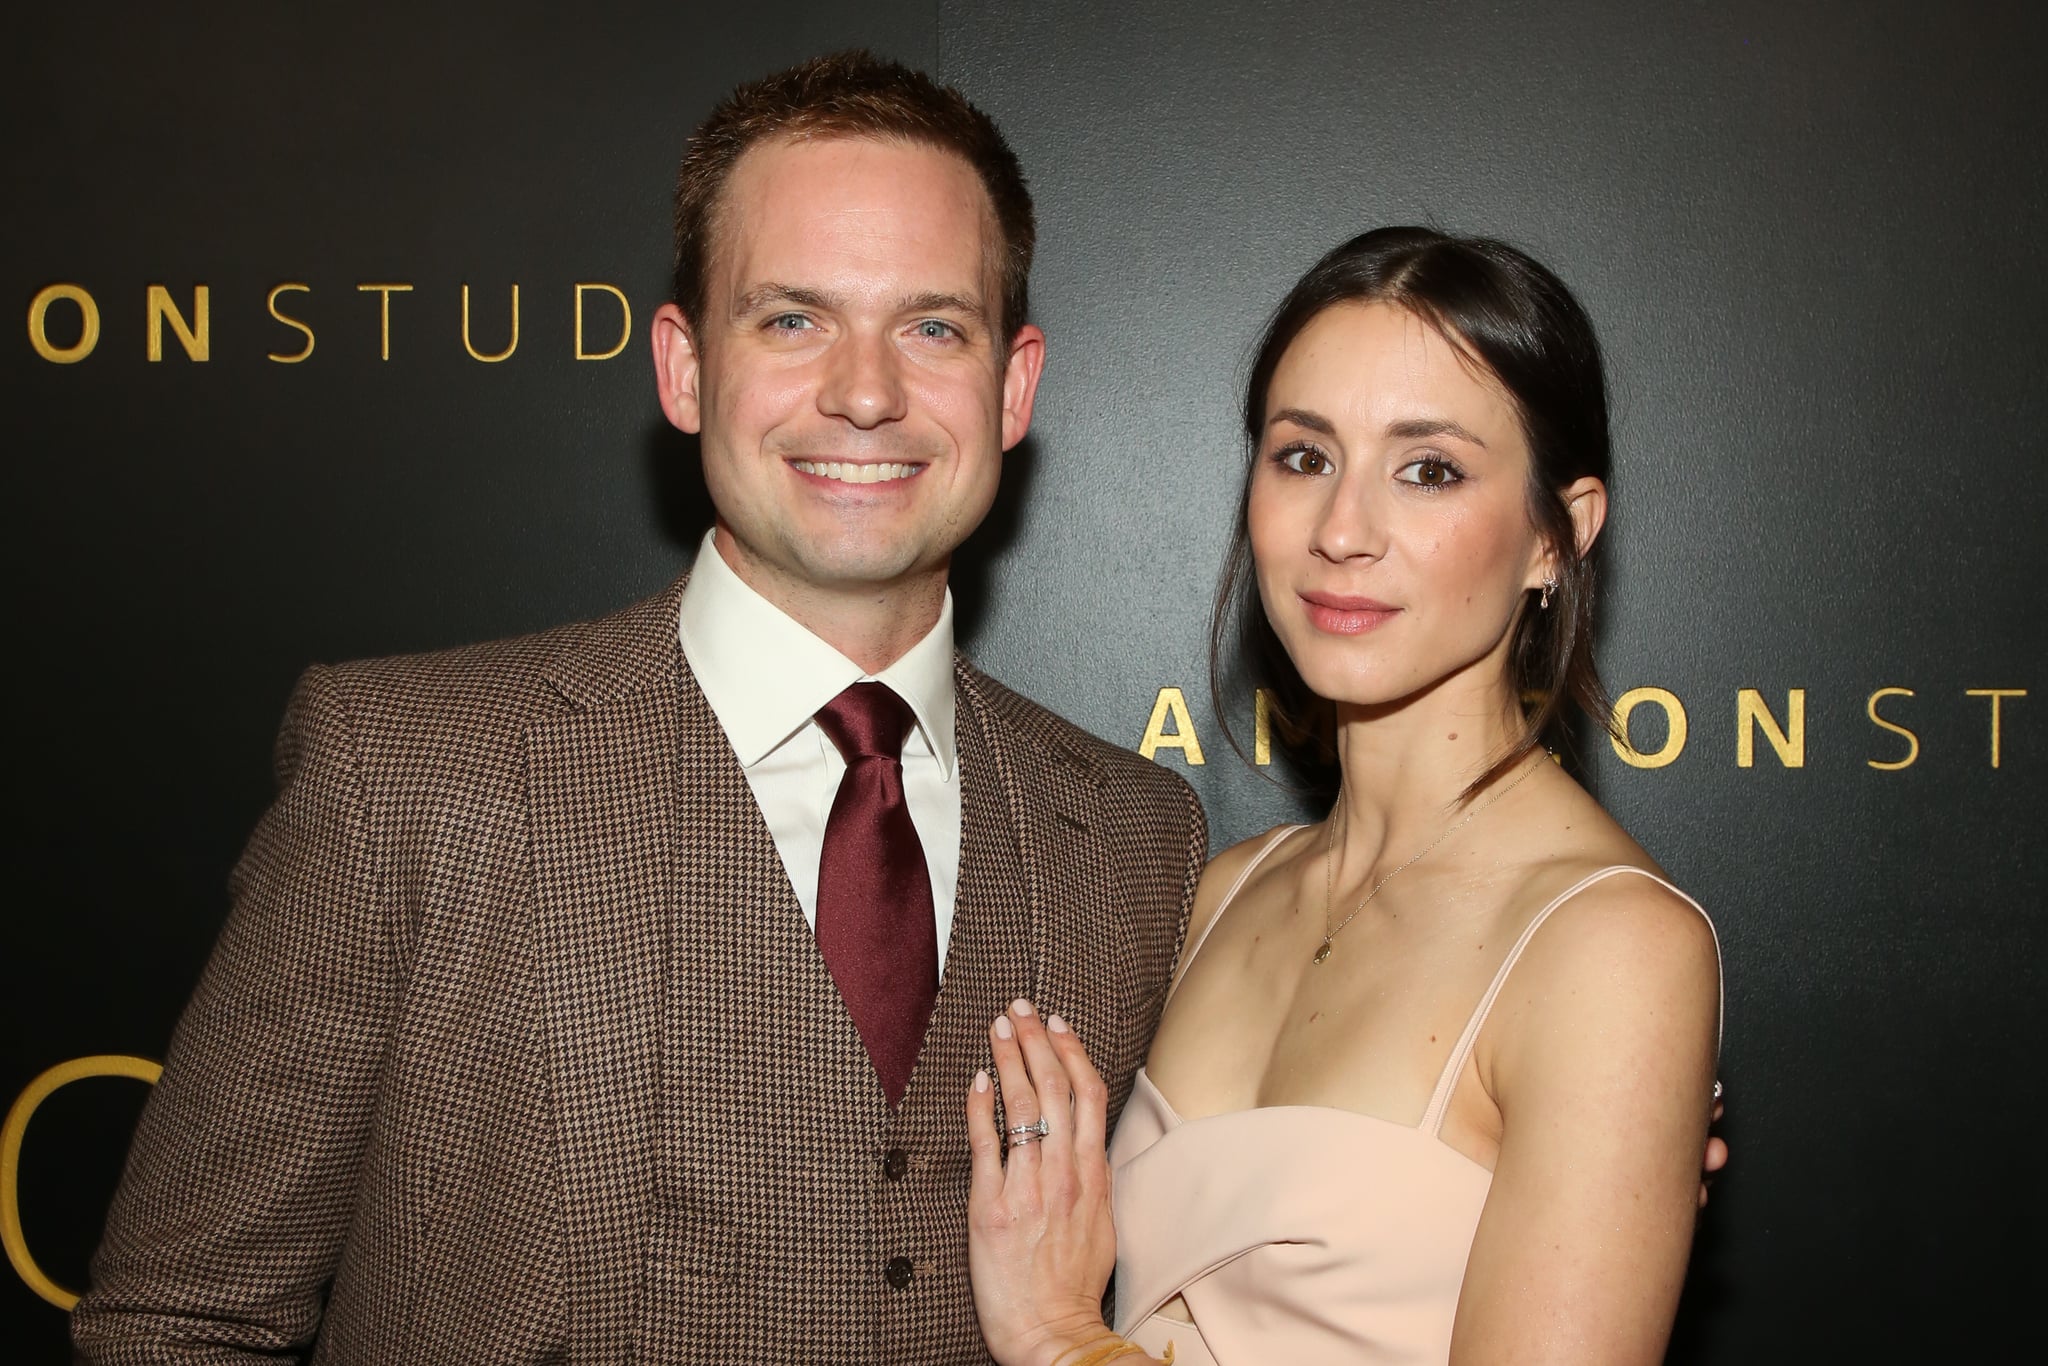 BEVERLY HILLS, CALIFORNIA - JANUARY 05: Actors Patrick J. Adams (L) and Troian Bellisario (R) attend Amazon Studios Golden Globes after party at The Beverly Hilton Hotel on January 05, 2020 in Beverly Hills, California. (Photo by Paul Archuleta/WireImage)